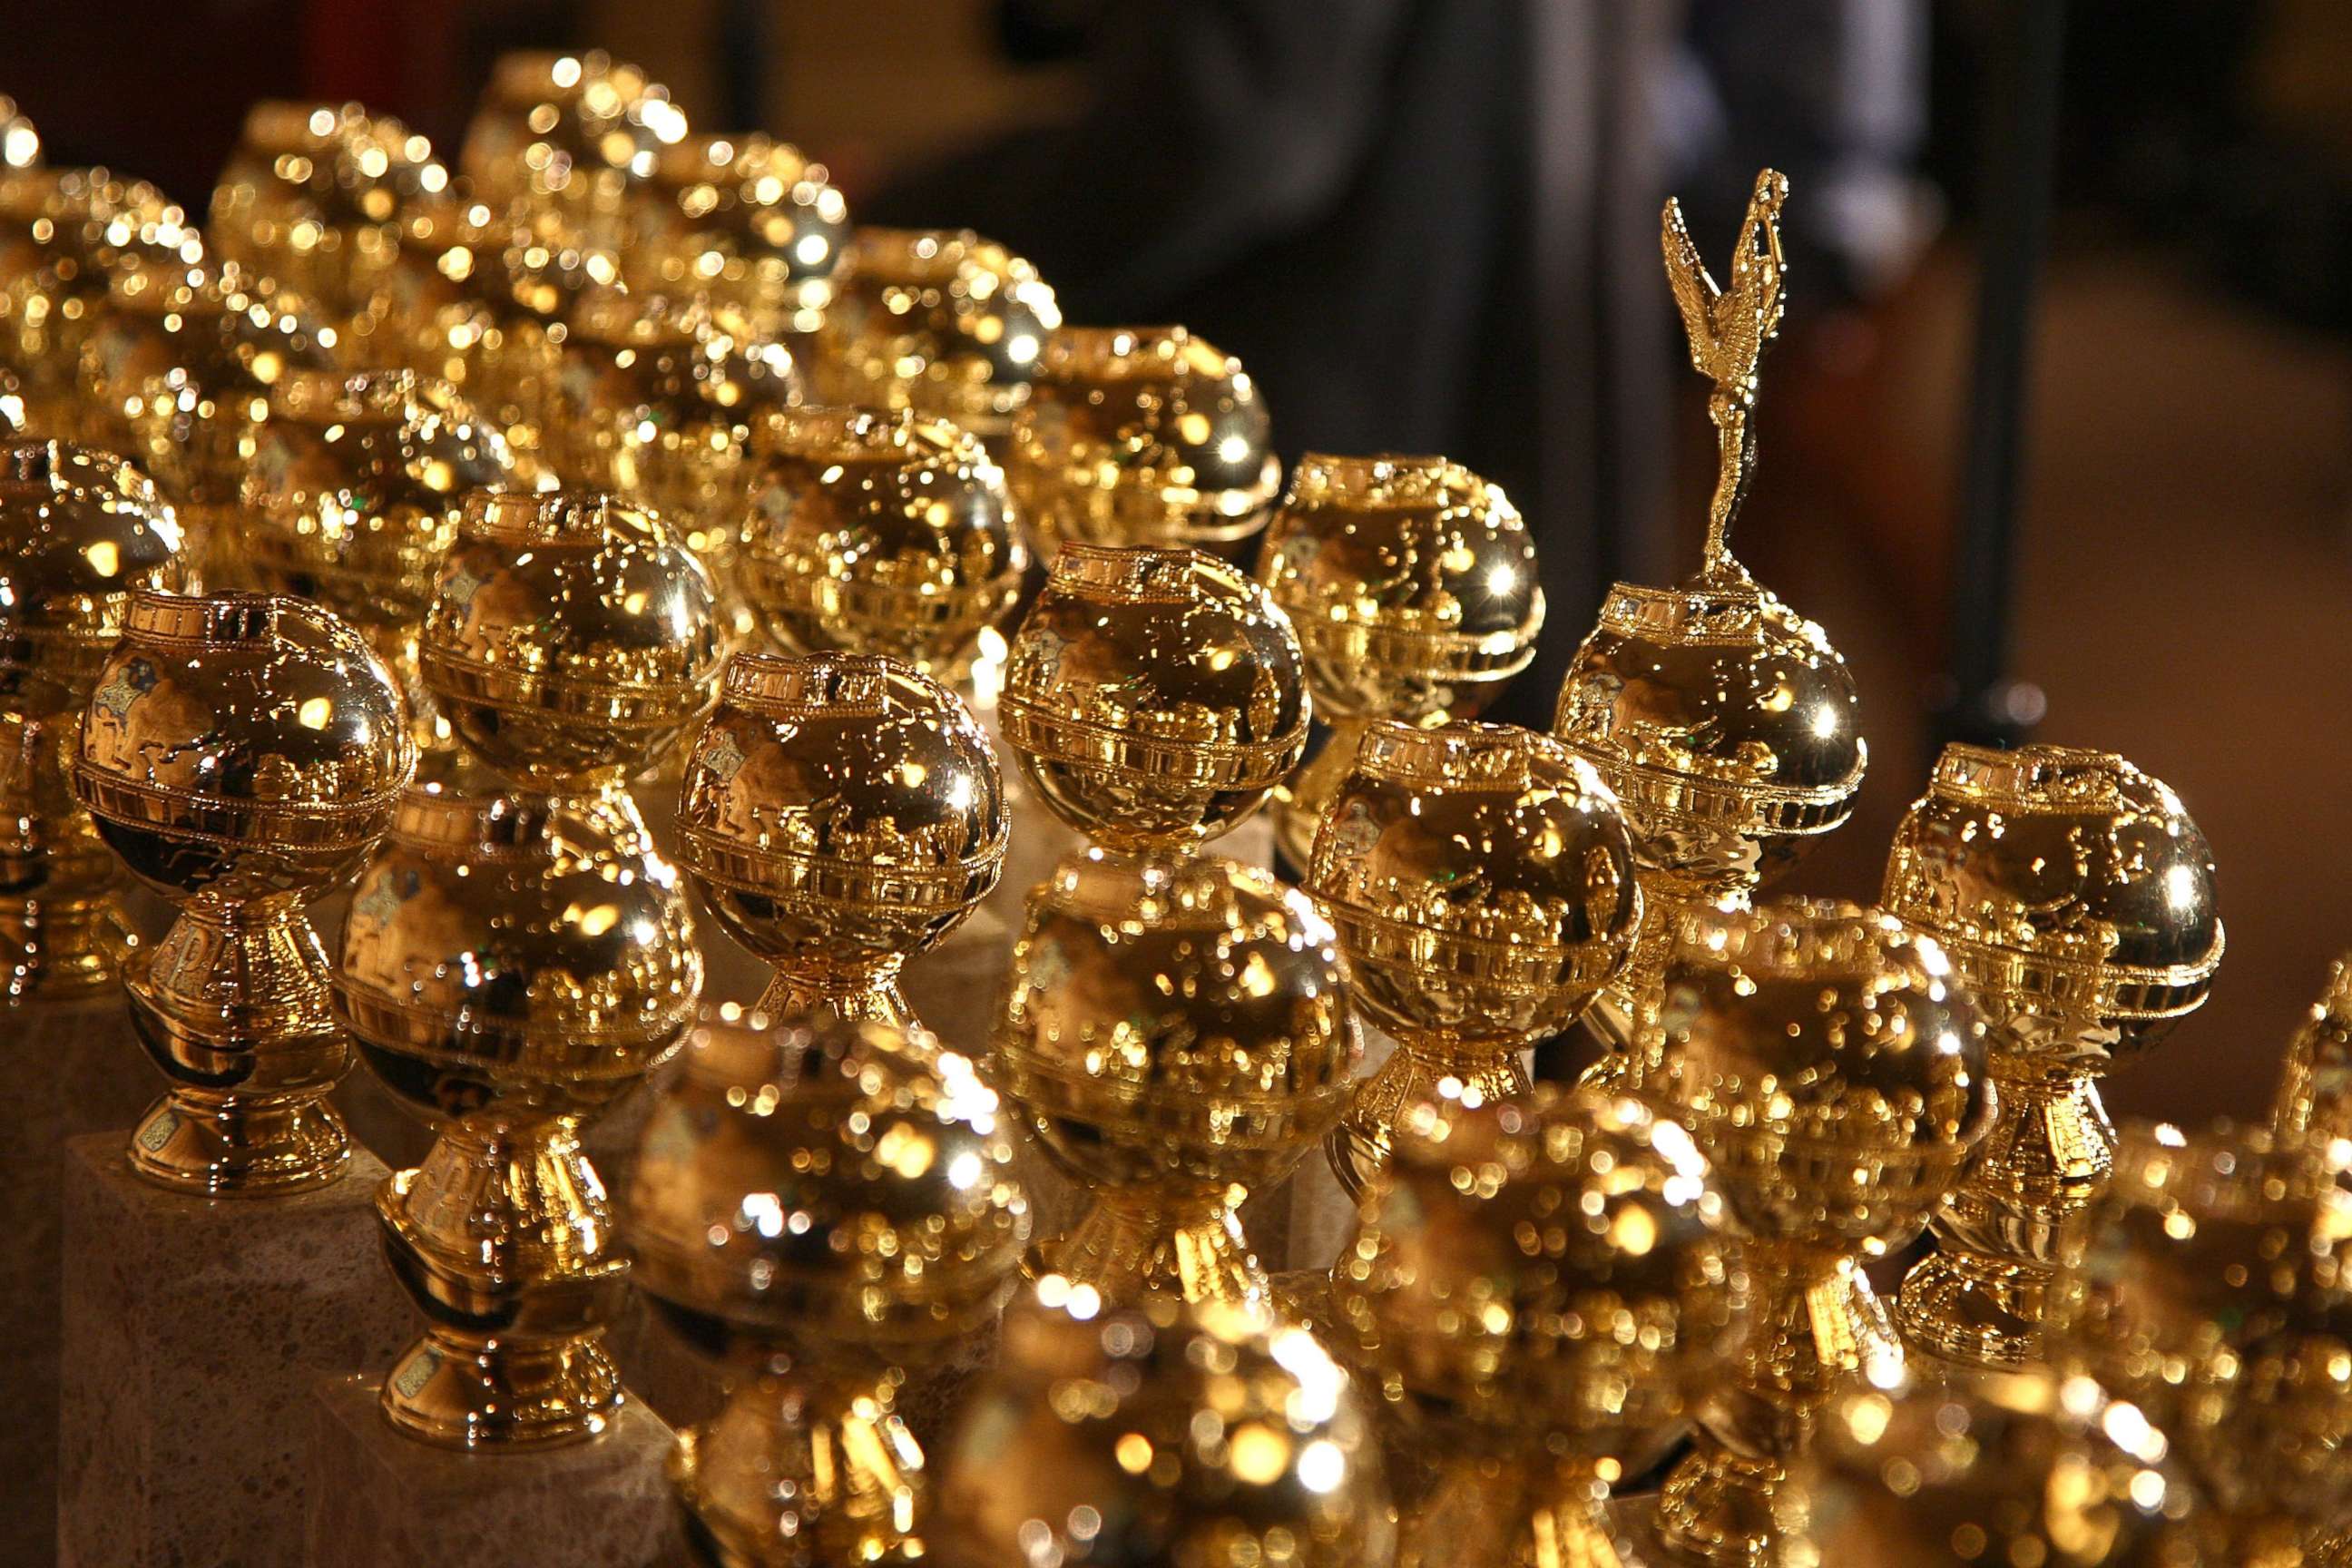 PHOTO: Golden Globe statuettes are on display during an unveiling by the Hollywood Foreign Press Association at the Beverly Hilton Hotel, Jan. 6, 2009 in Beverly Hills, Calif. 